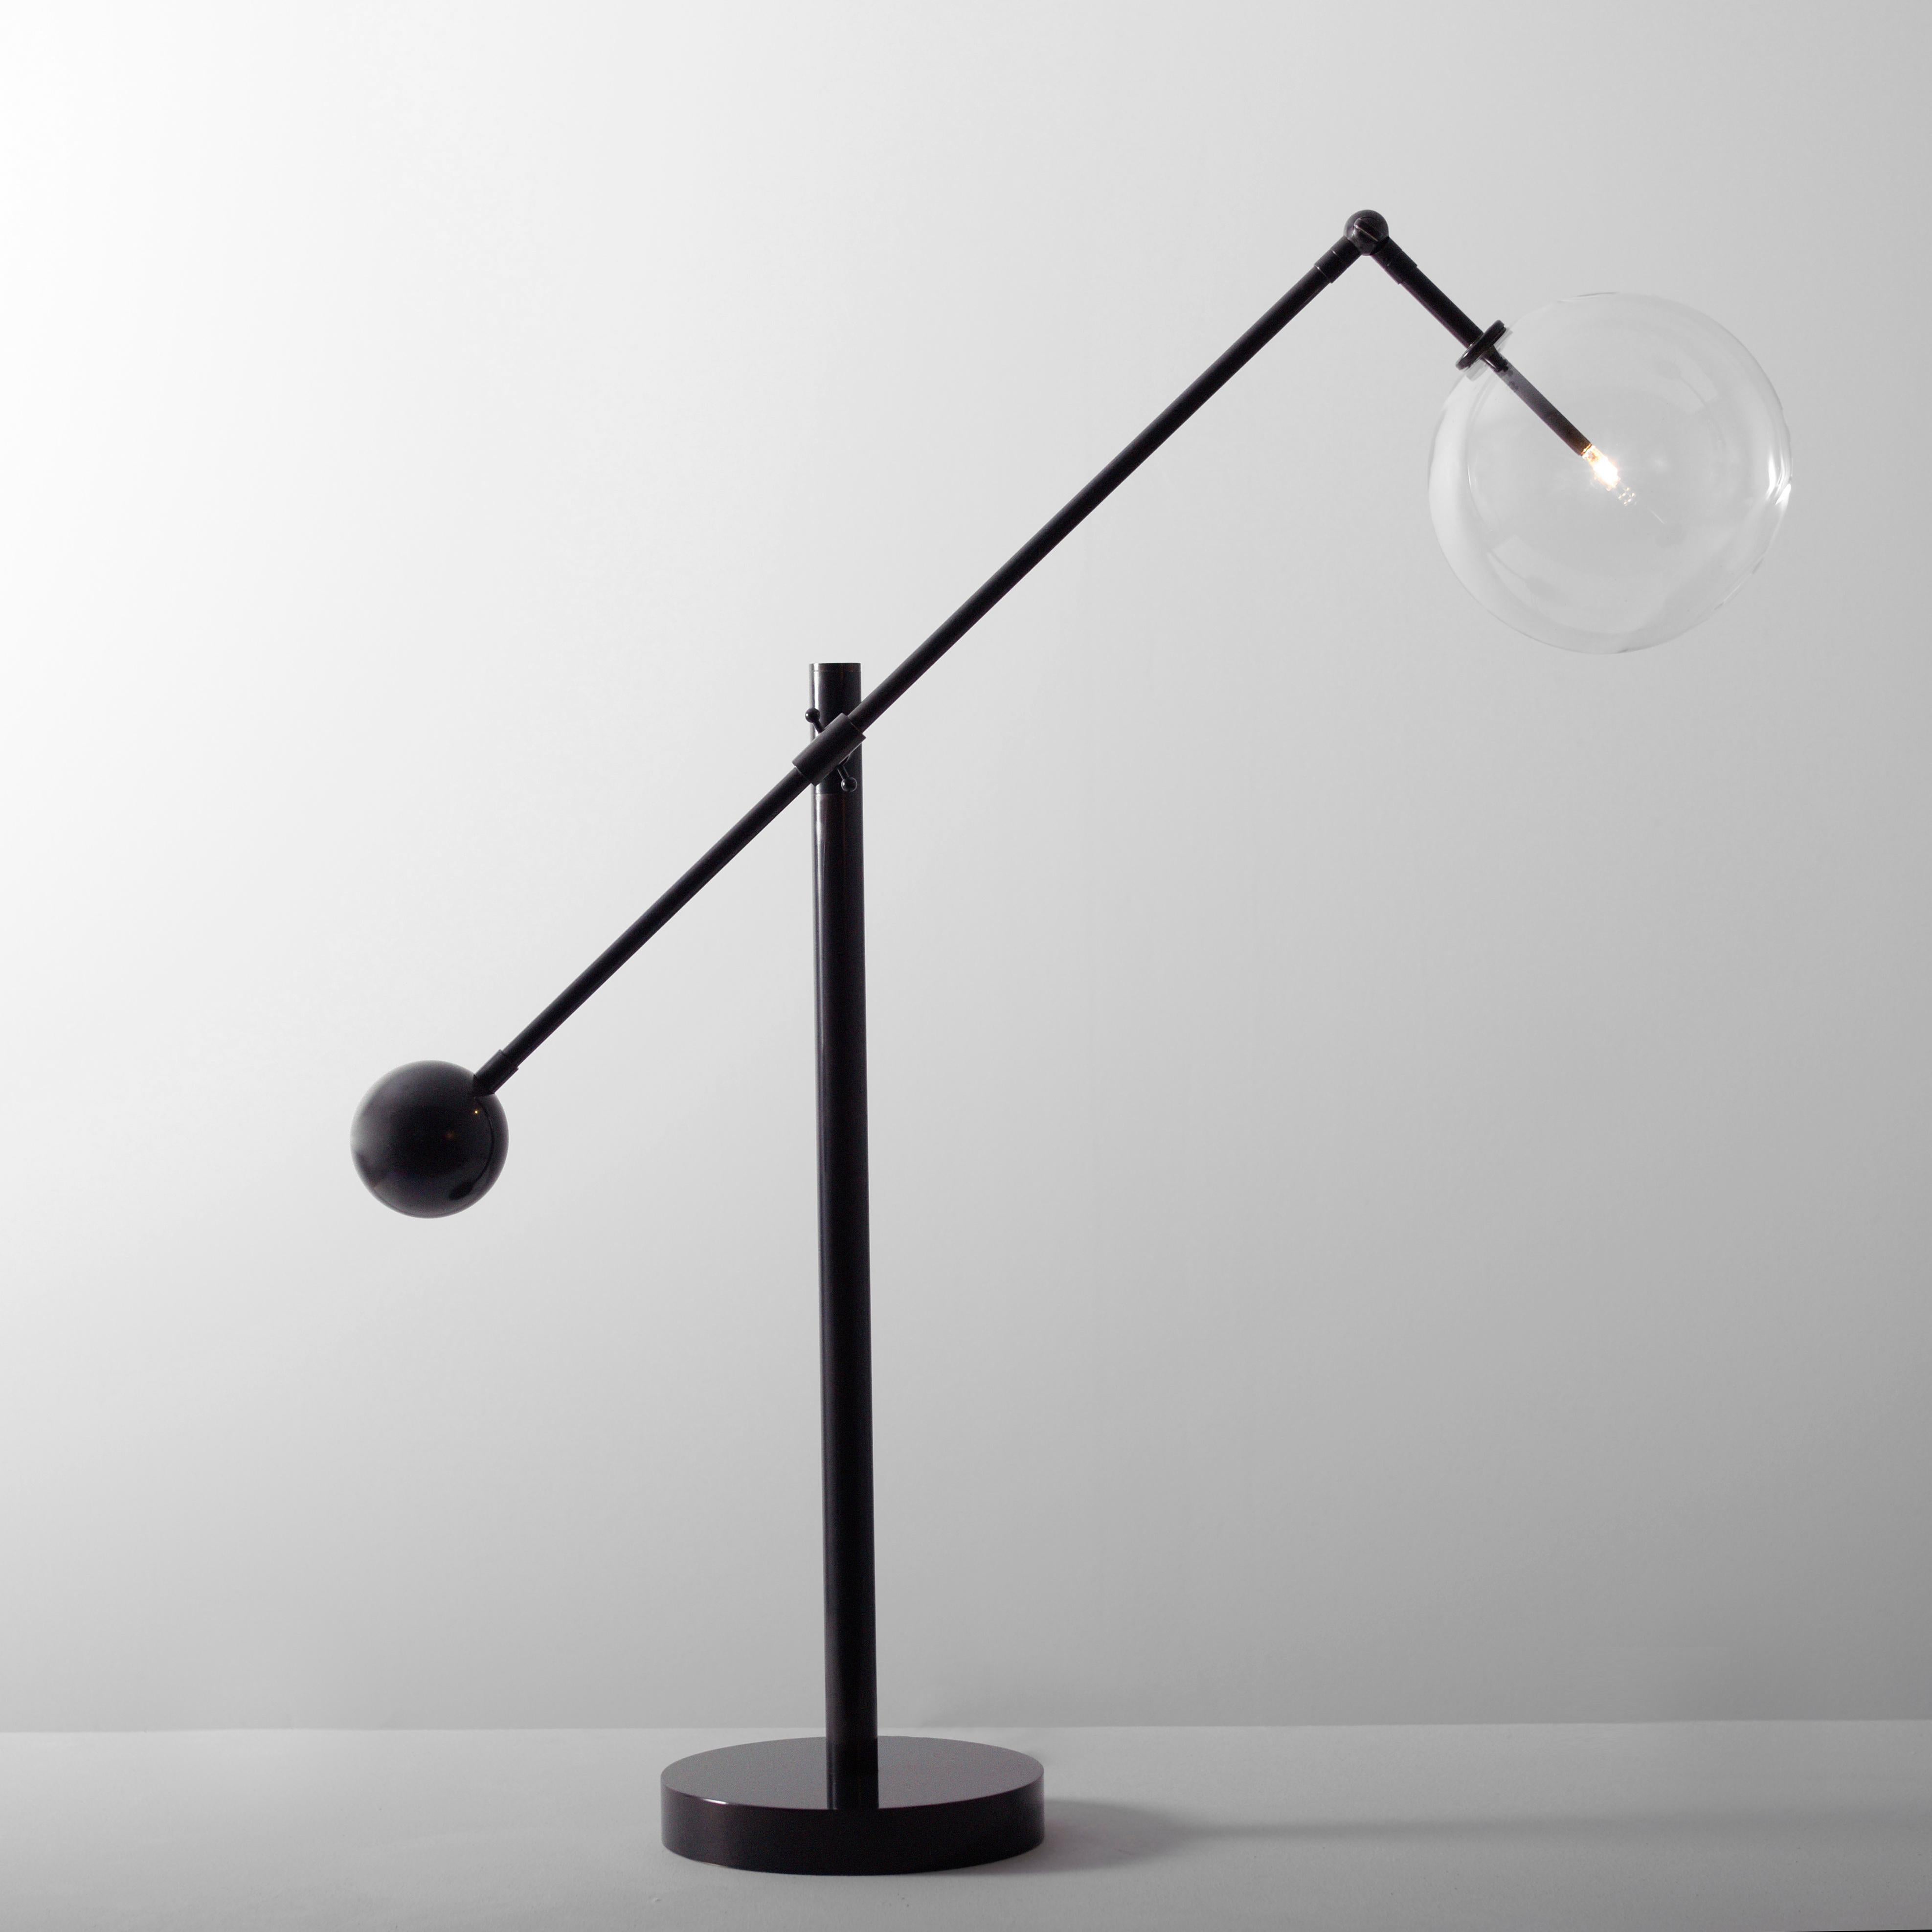 Black Gunmetal contemporary table lamp by Schwung
Dimensions: D 113 x W 33.4 x H 170 cm
Materials: solid brass, hand-blown glass globes
Finish: black gunmetal. 
Available in finishes: natural brass or polished nickel. Also available in floor